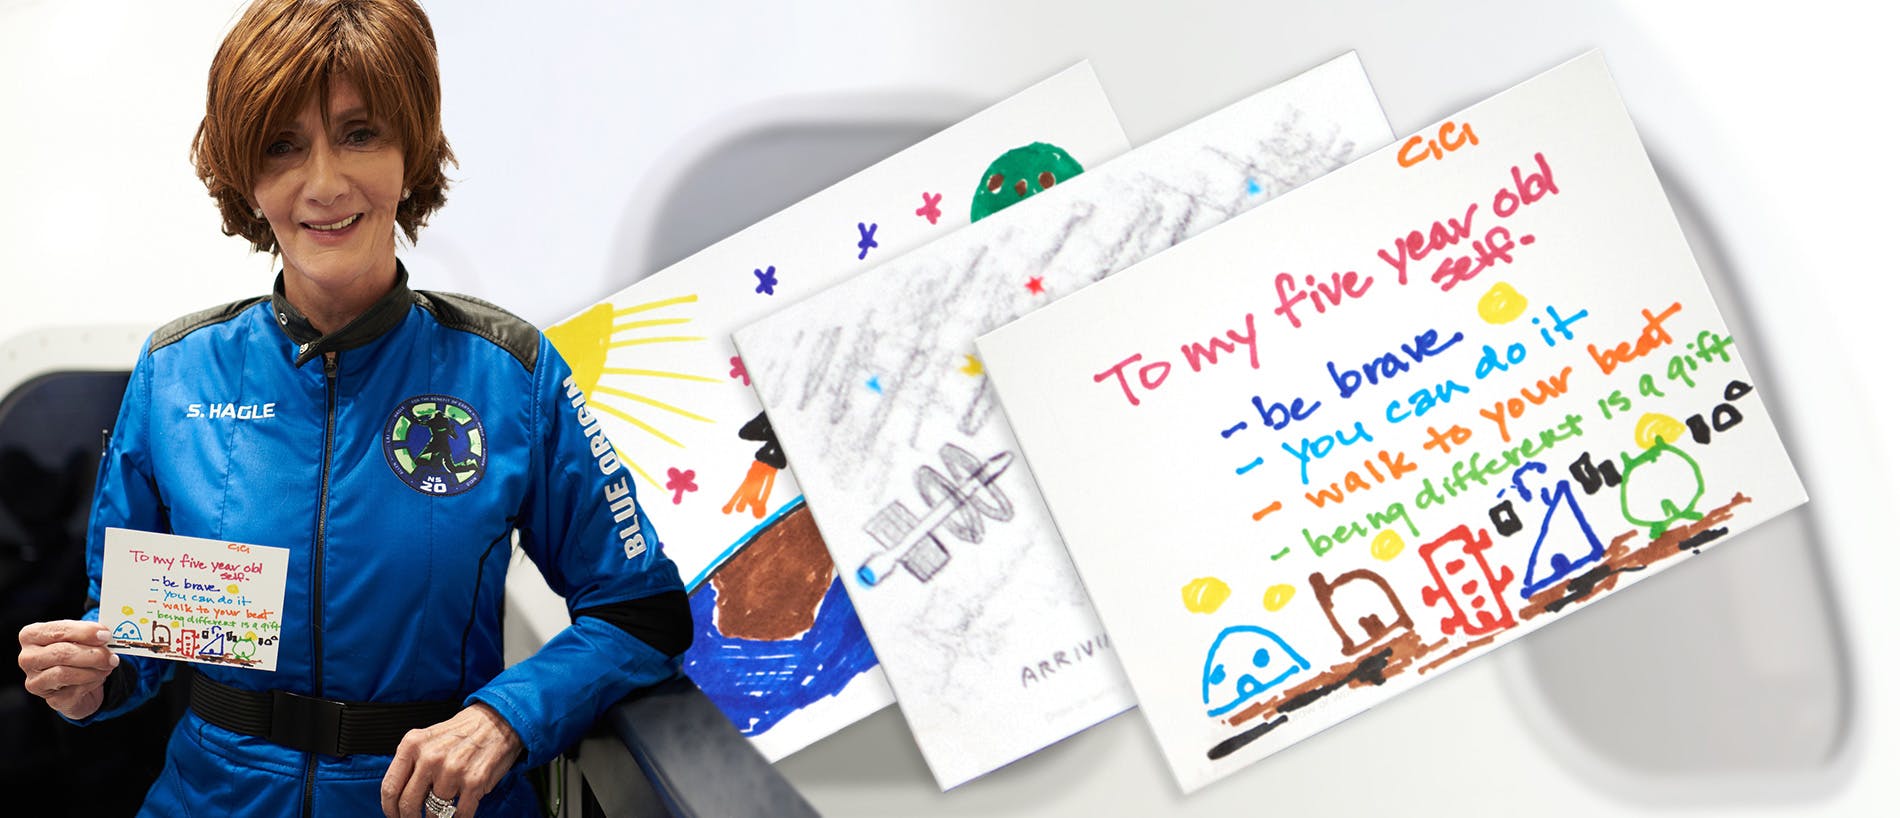 Sharon Hagle (left) next to sample postcards with space-related drawings